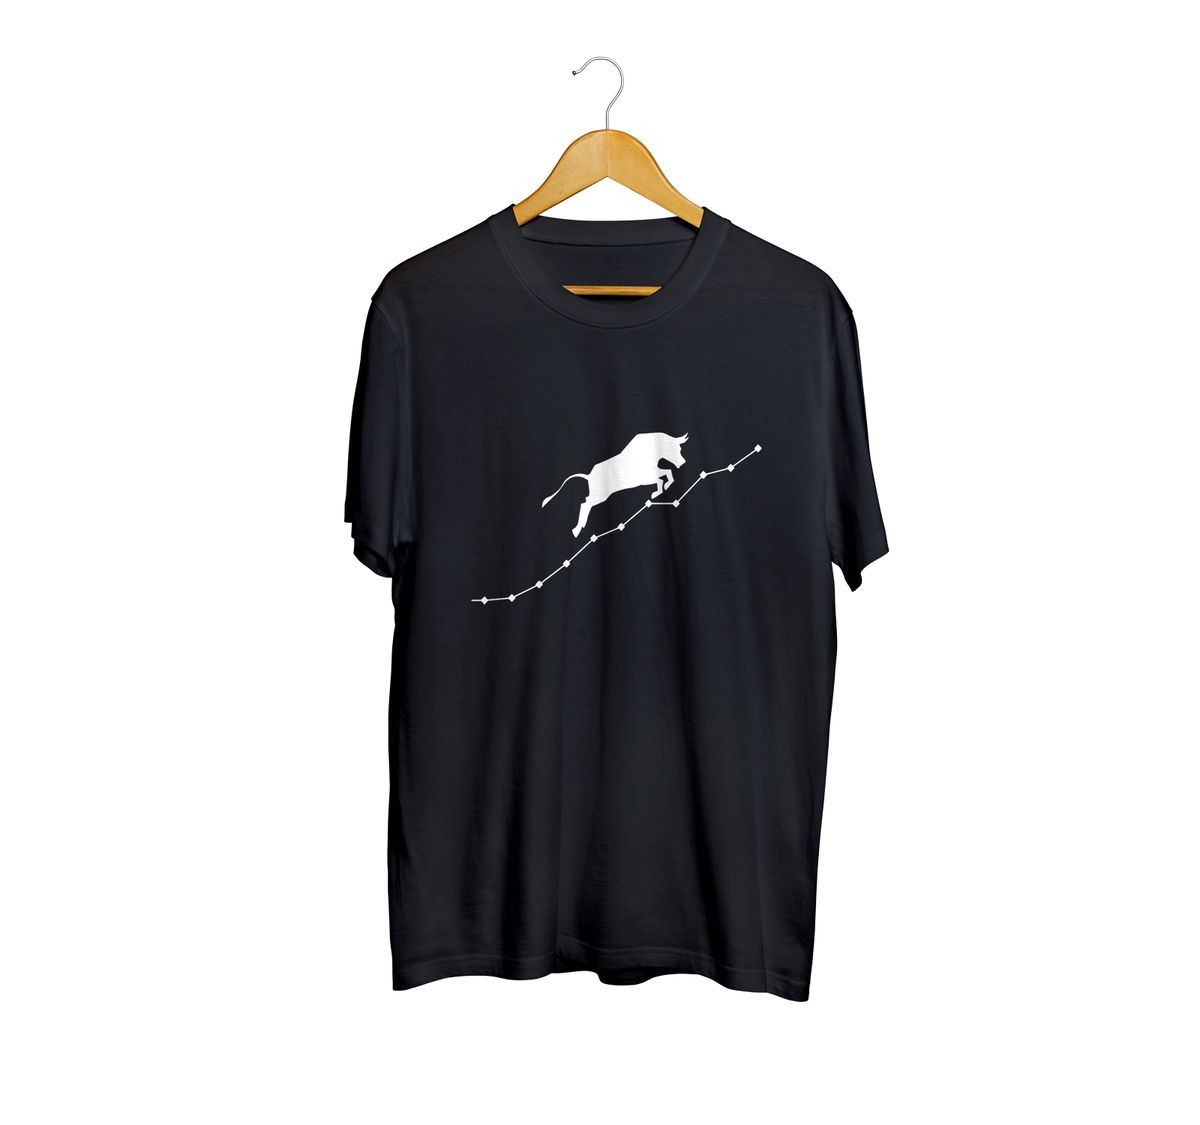 Stock Holders United Black Exclusive T-Shirt image 1